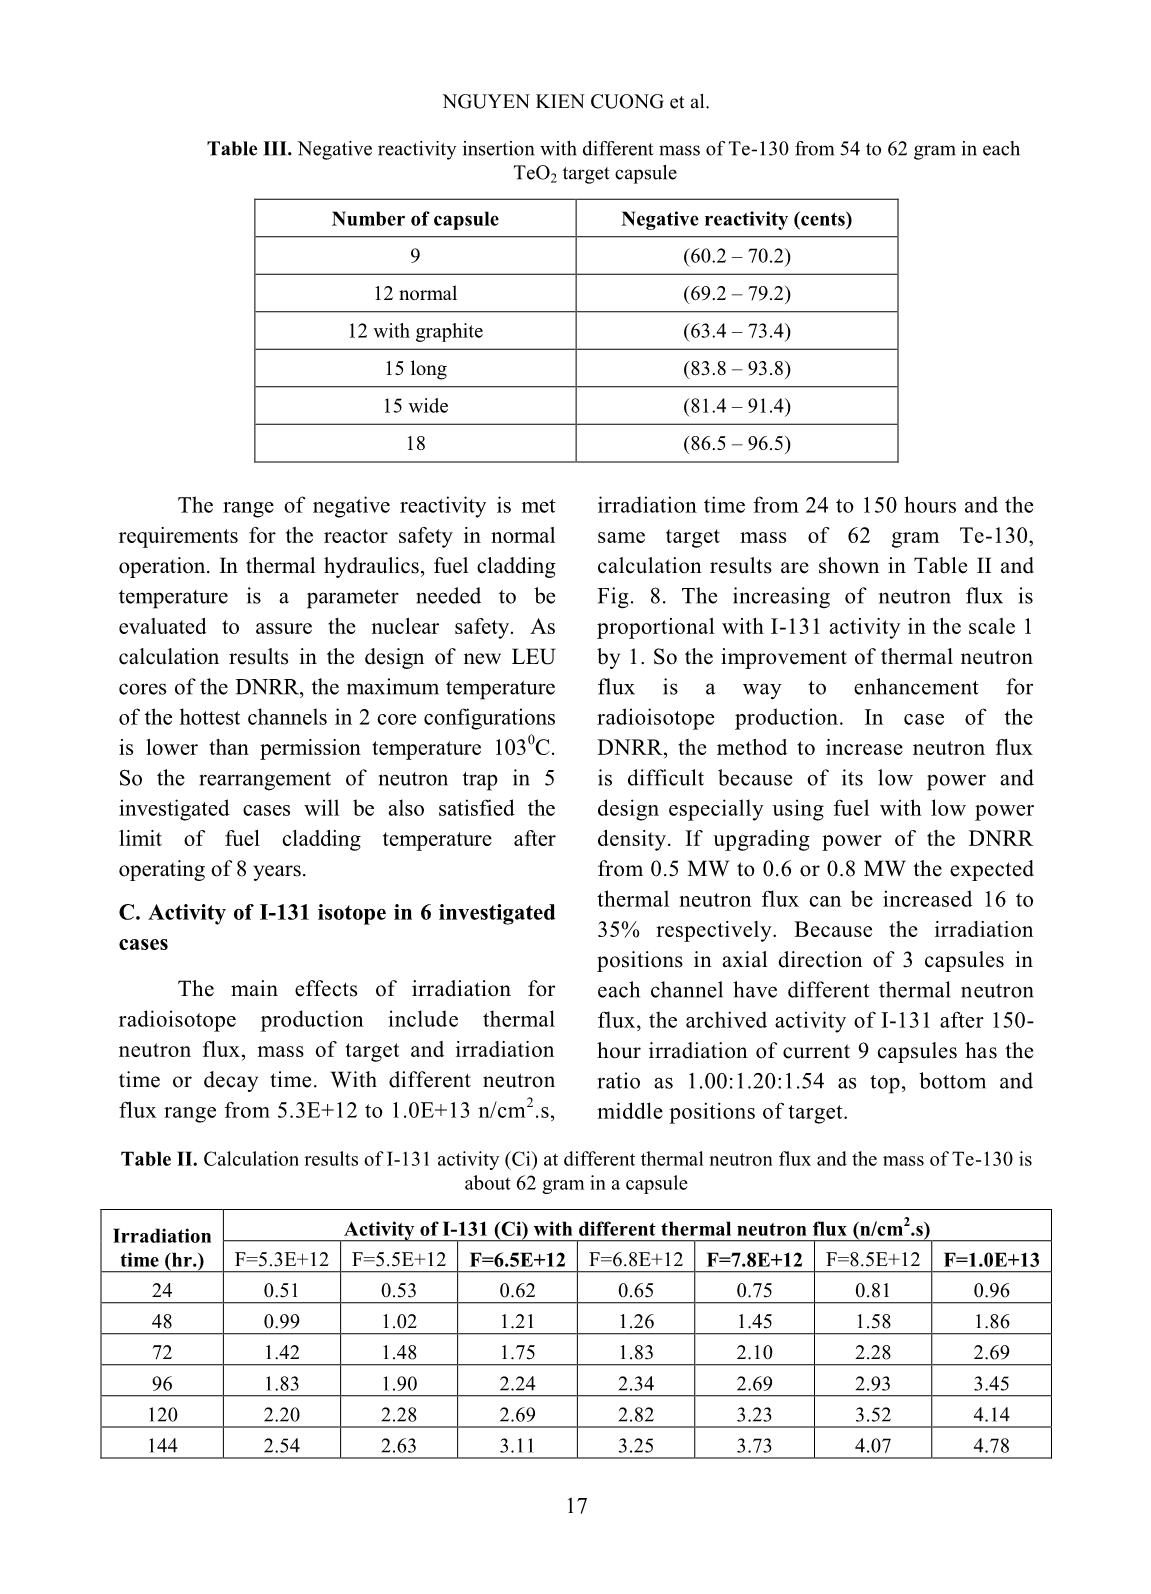 Calculation results for enhancing ability of I-131 radioisotope production using tellurium dioxide target on the dalat nuclear research reactor trang 9